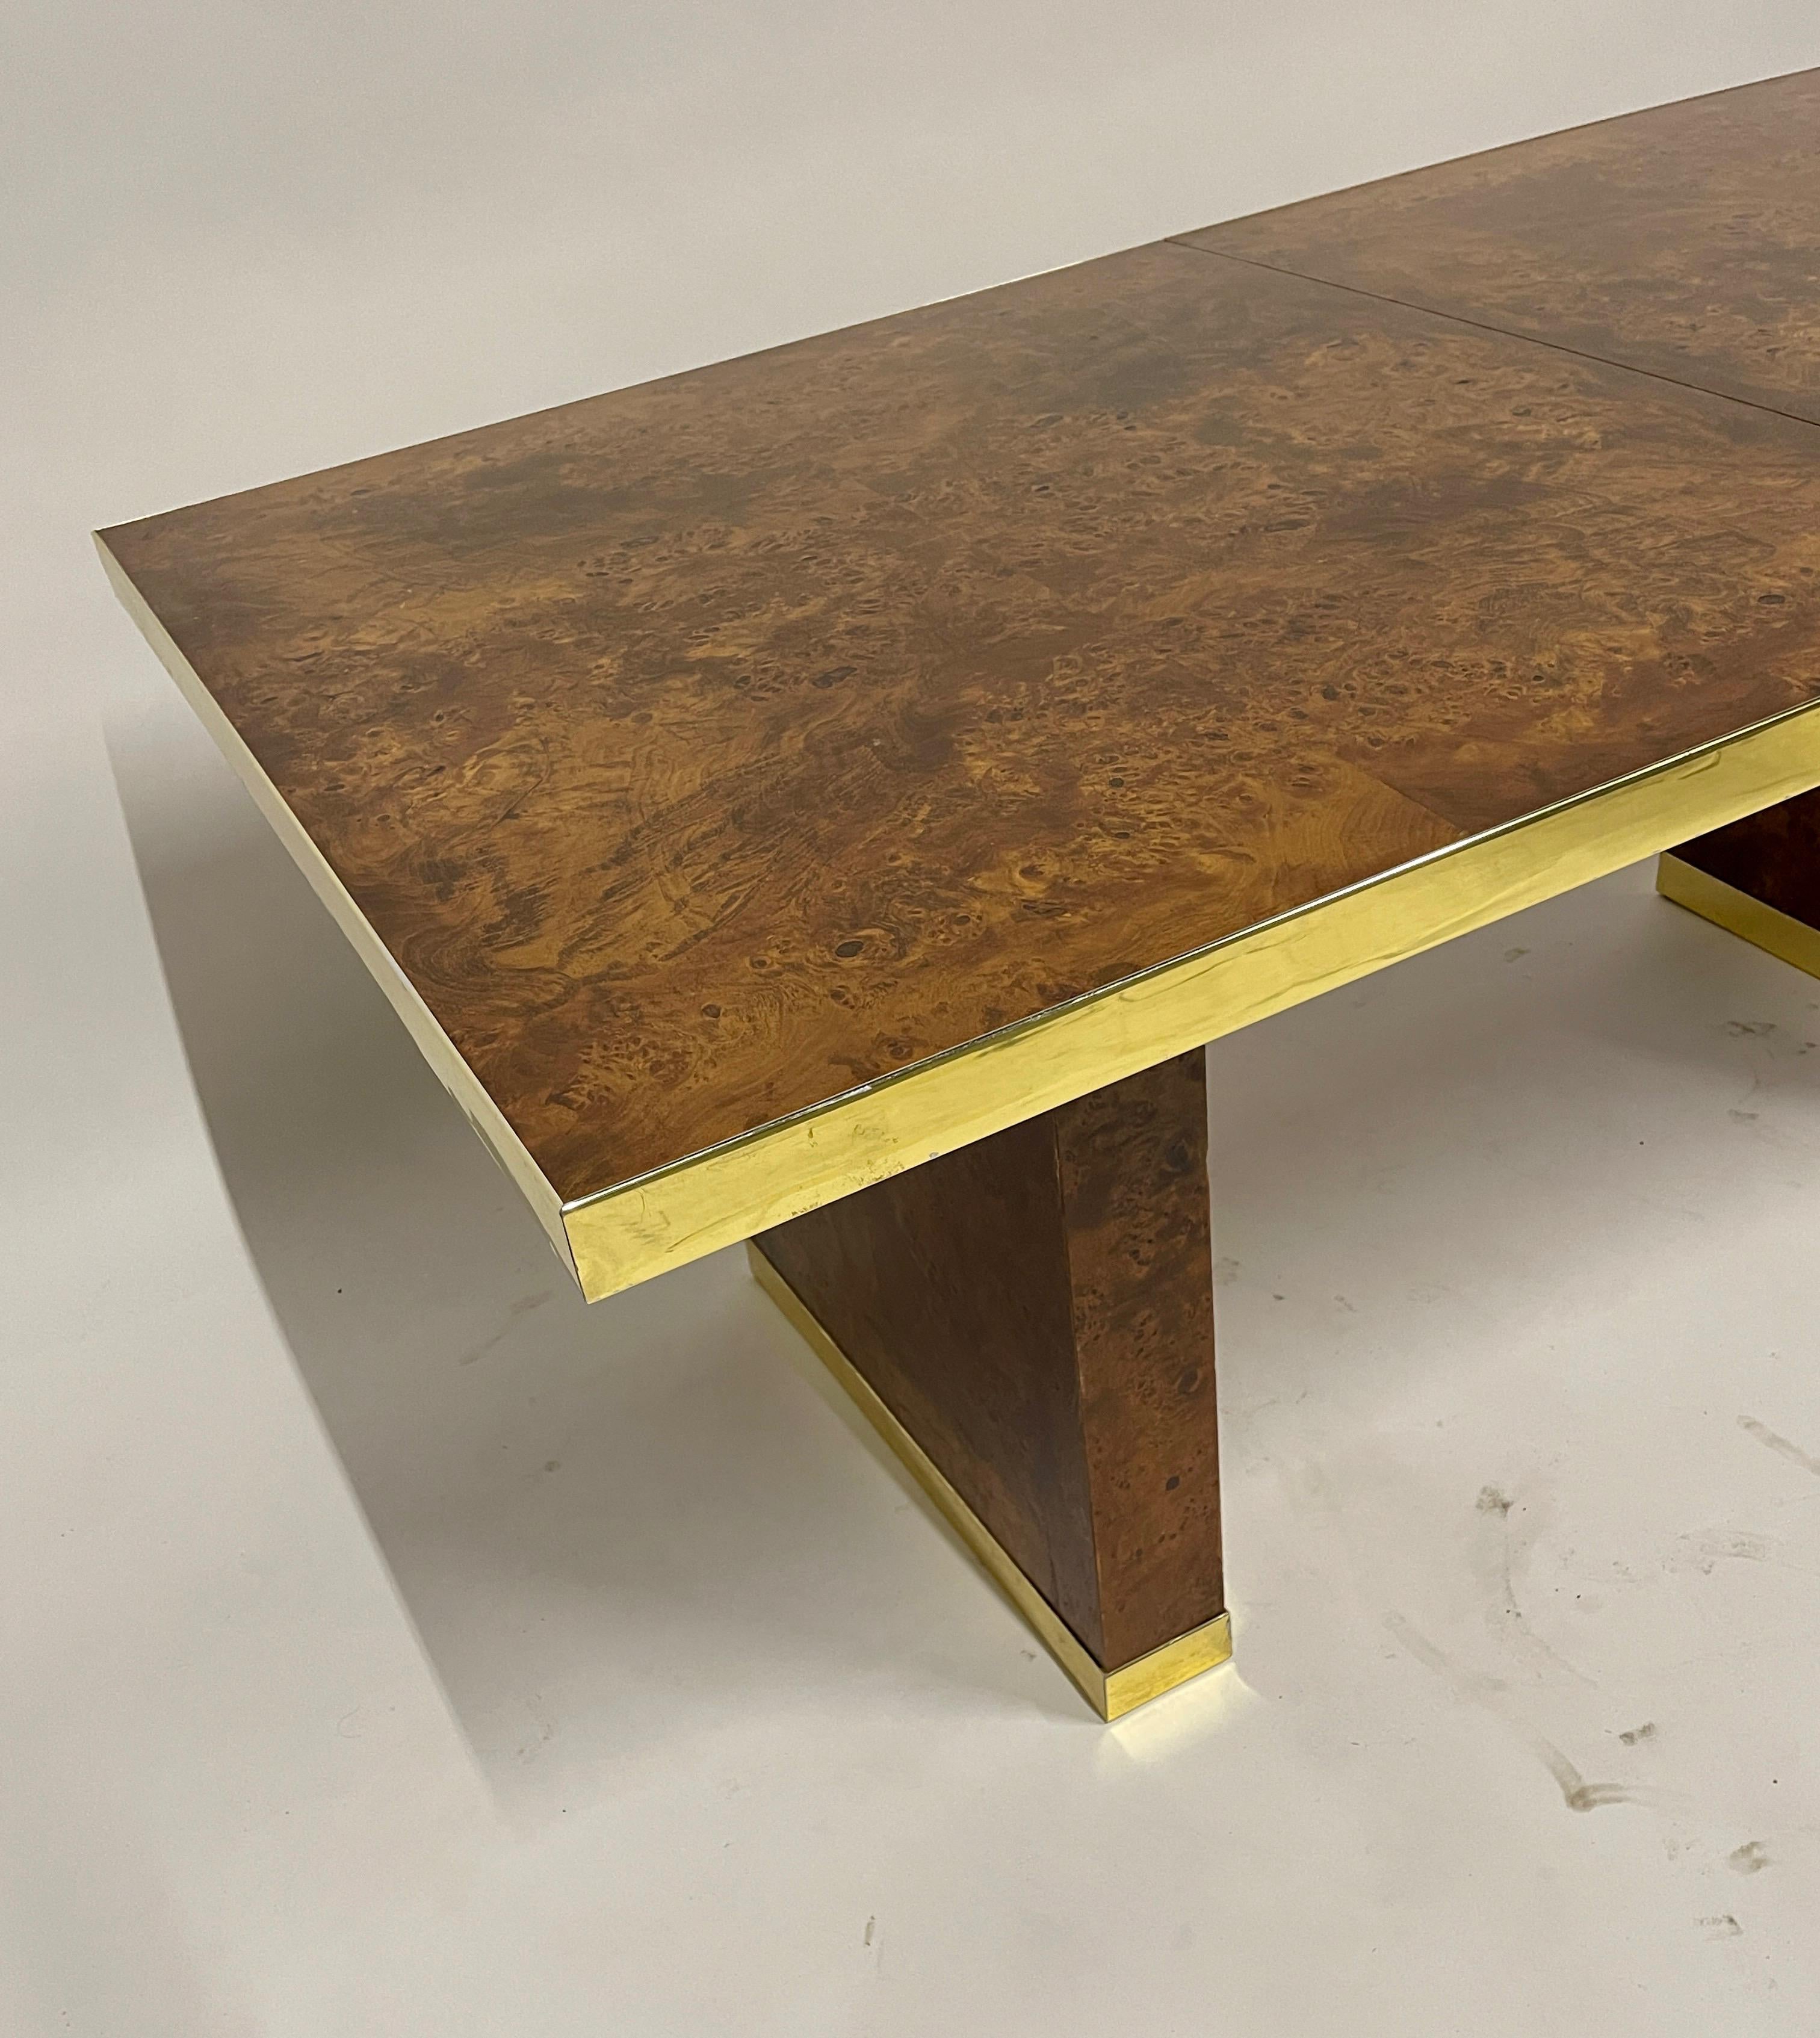 Elegant signed Pierre Cardin olive burl dining table with brass accents. Measures 6 feet long with no leaves and has two 18